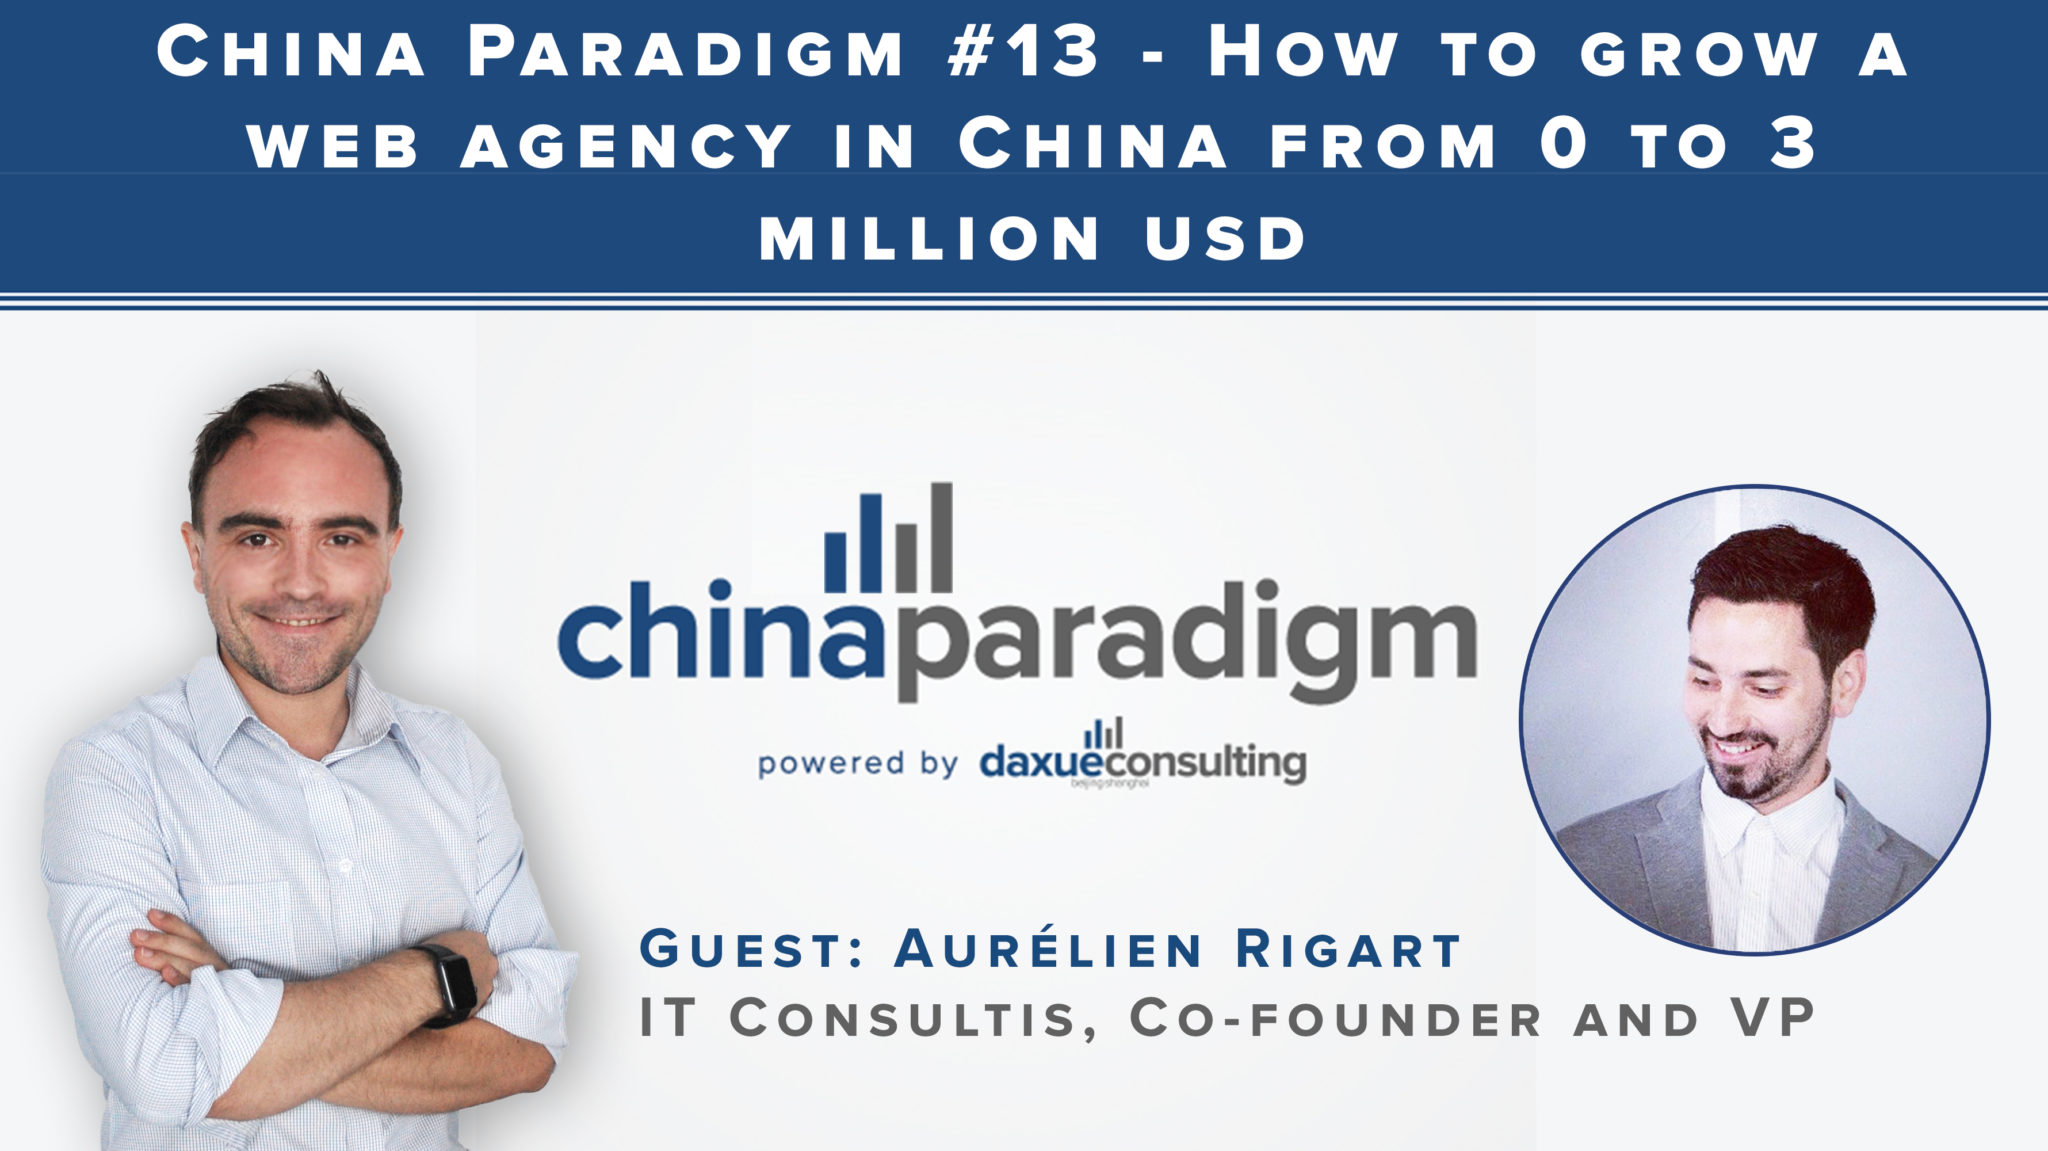 [Podcast] China paradigm #13: How to grow a web agency in China from 0 to 3 million USD